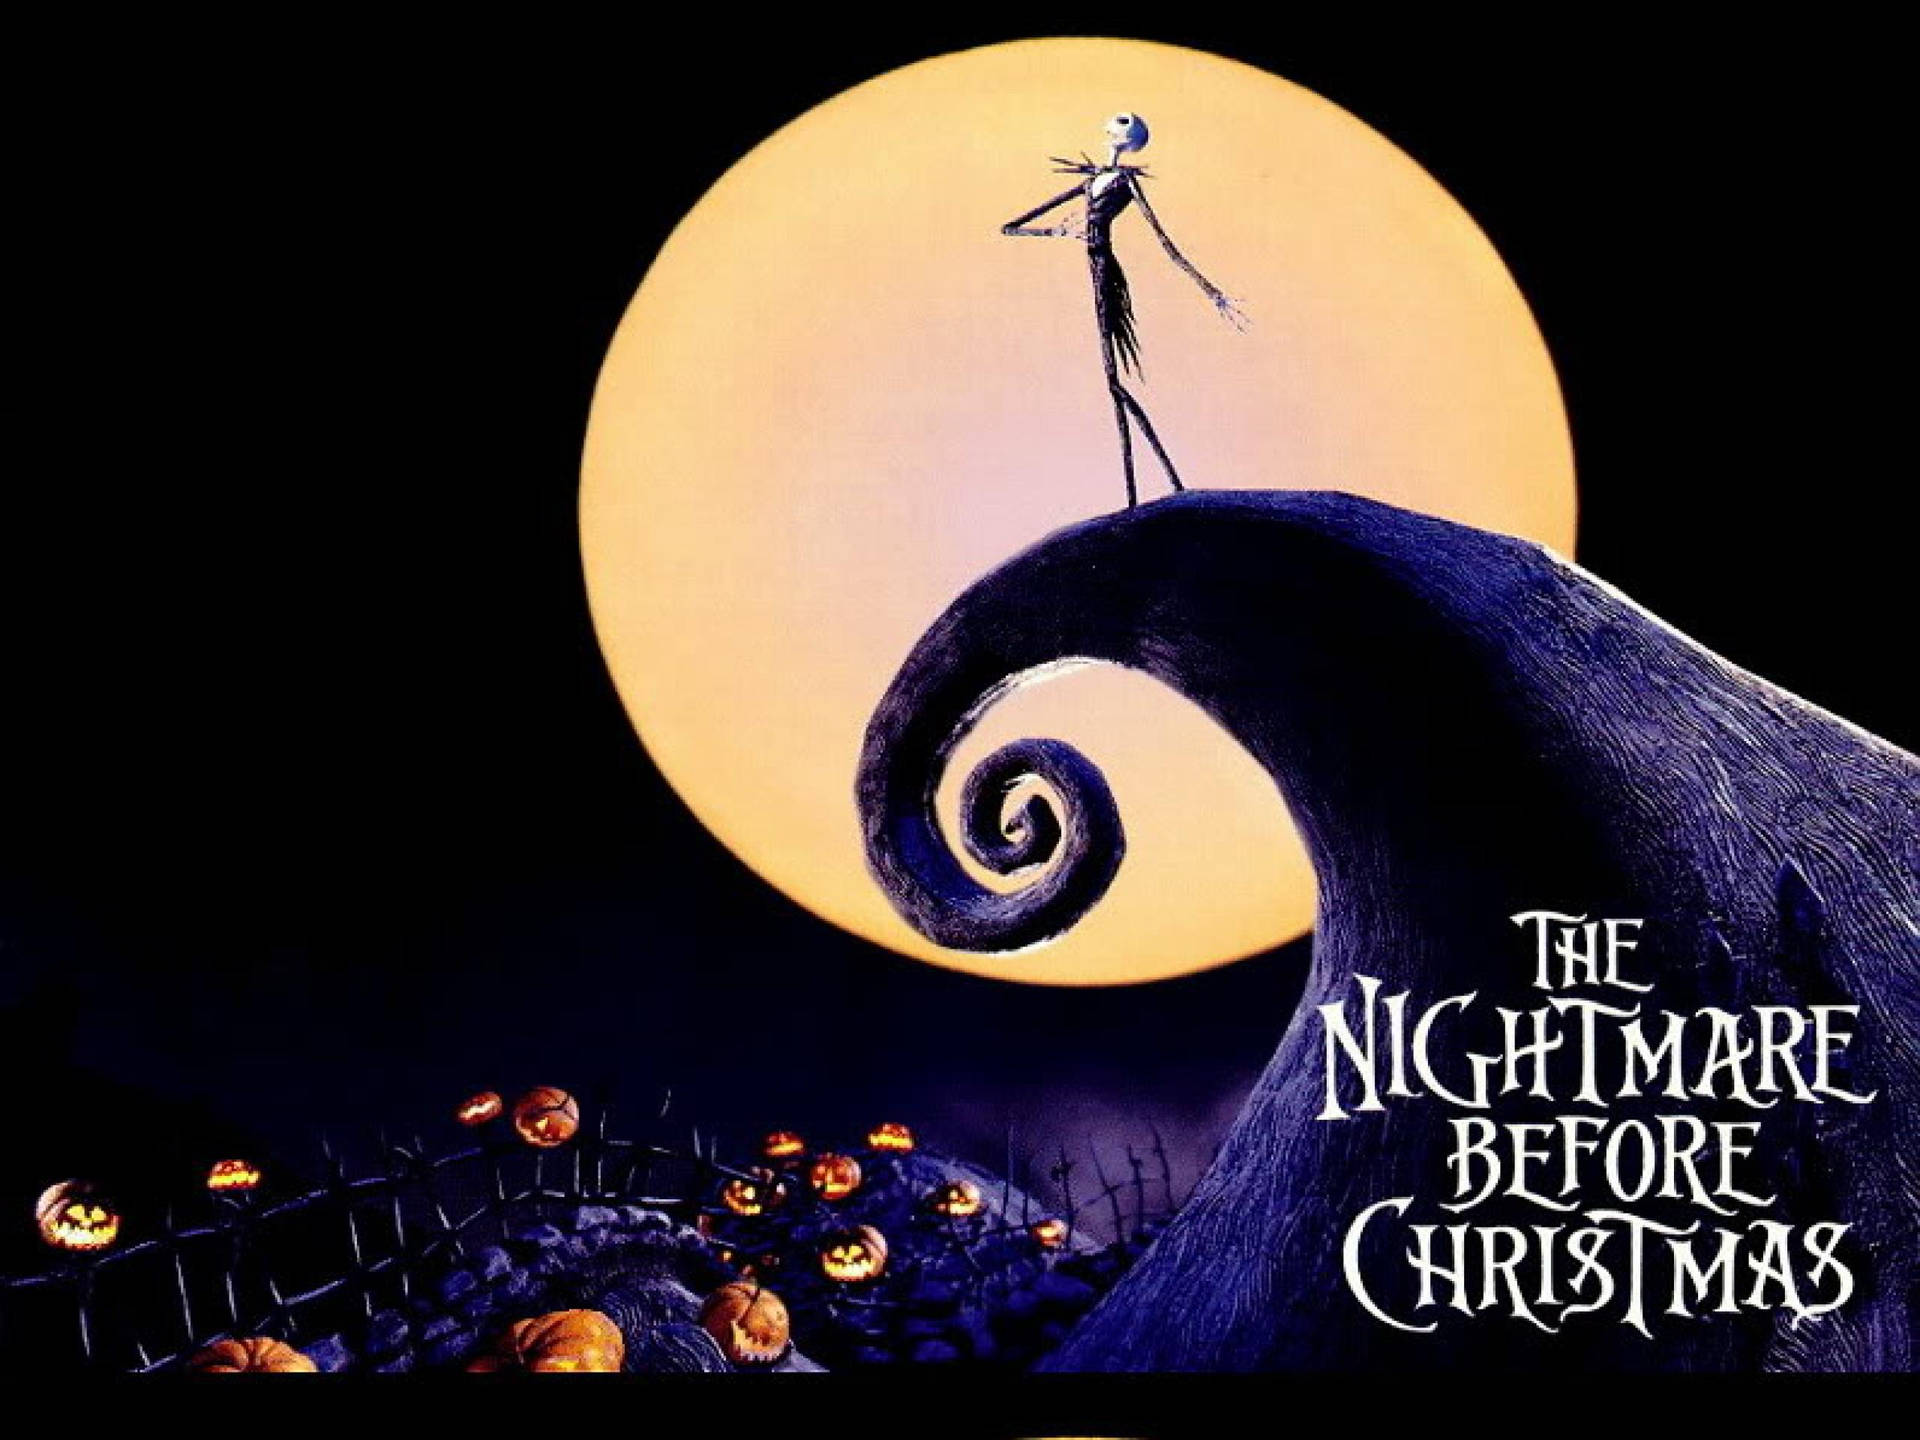 The Nightmare Before Christmas Film Poster